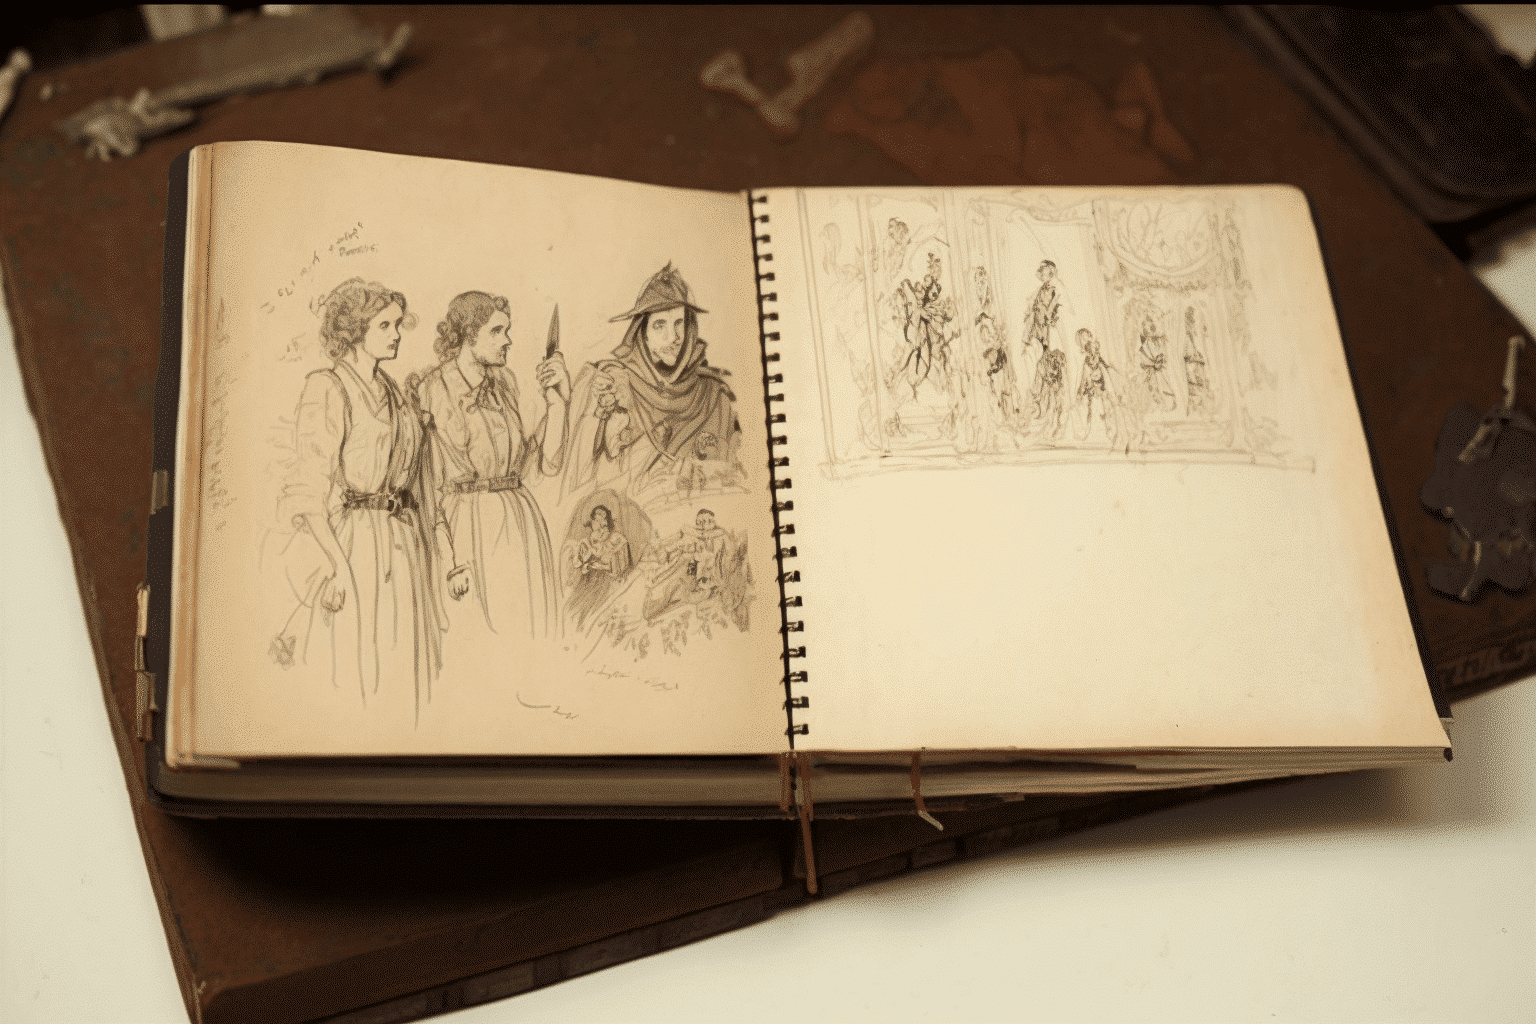 a-treasure-returns-queen-victoria's-sketchbook-back-in-the-royal-collection